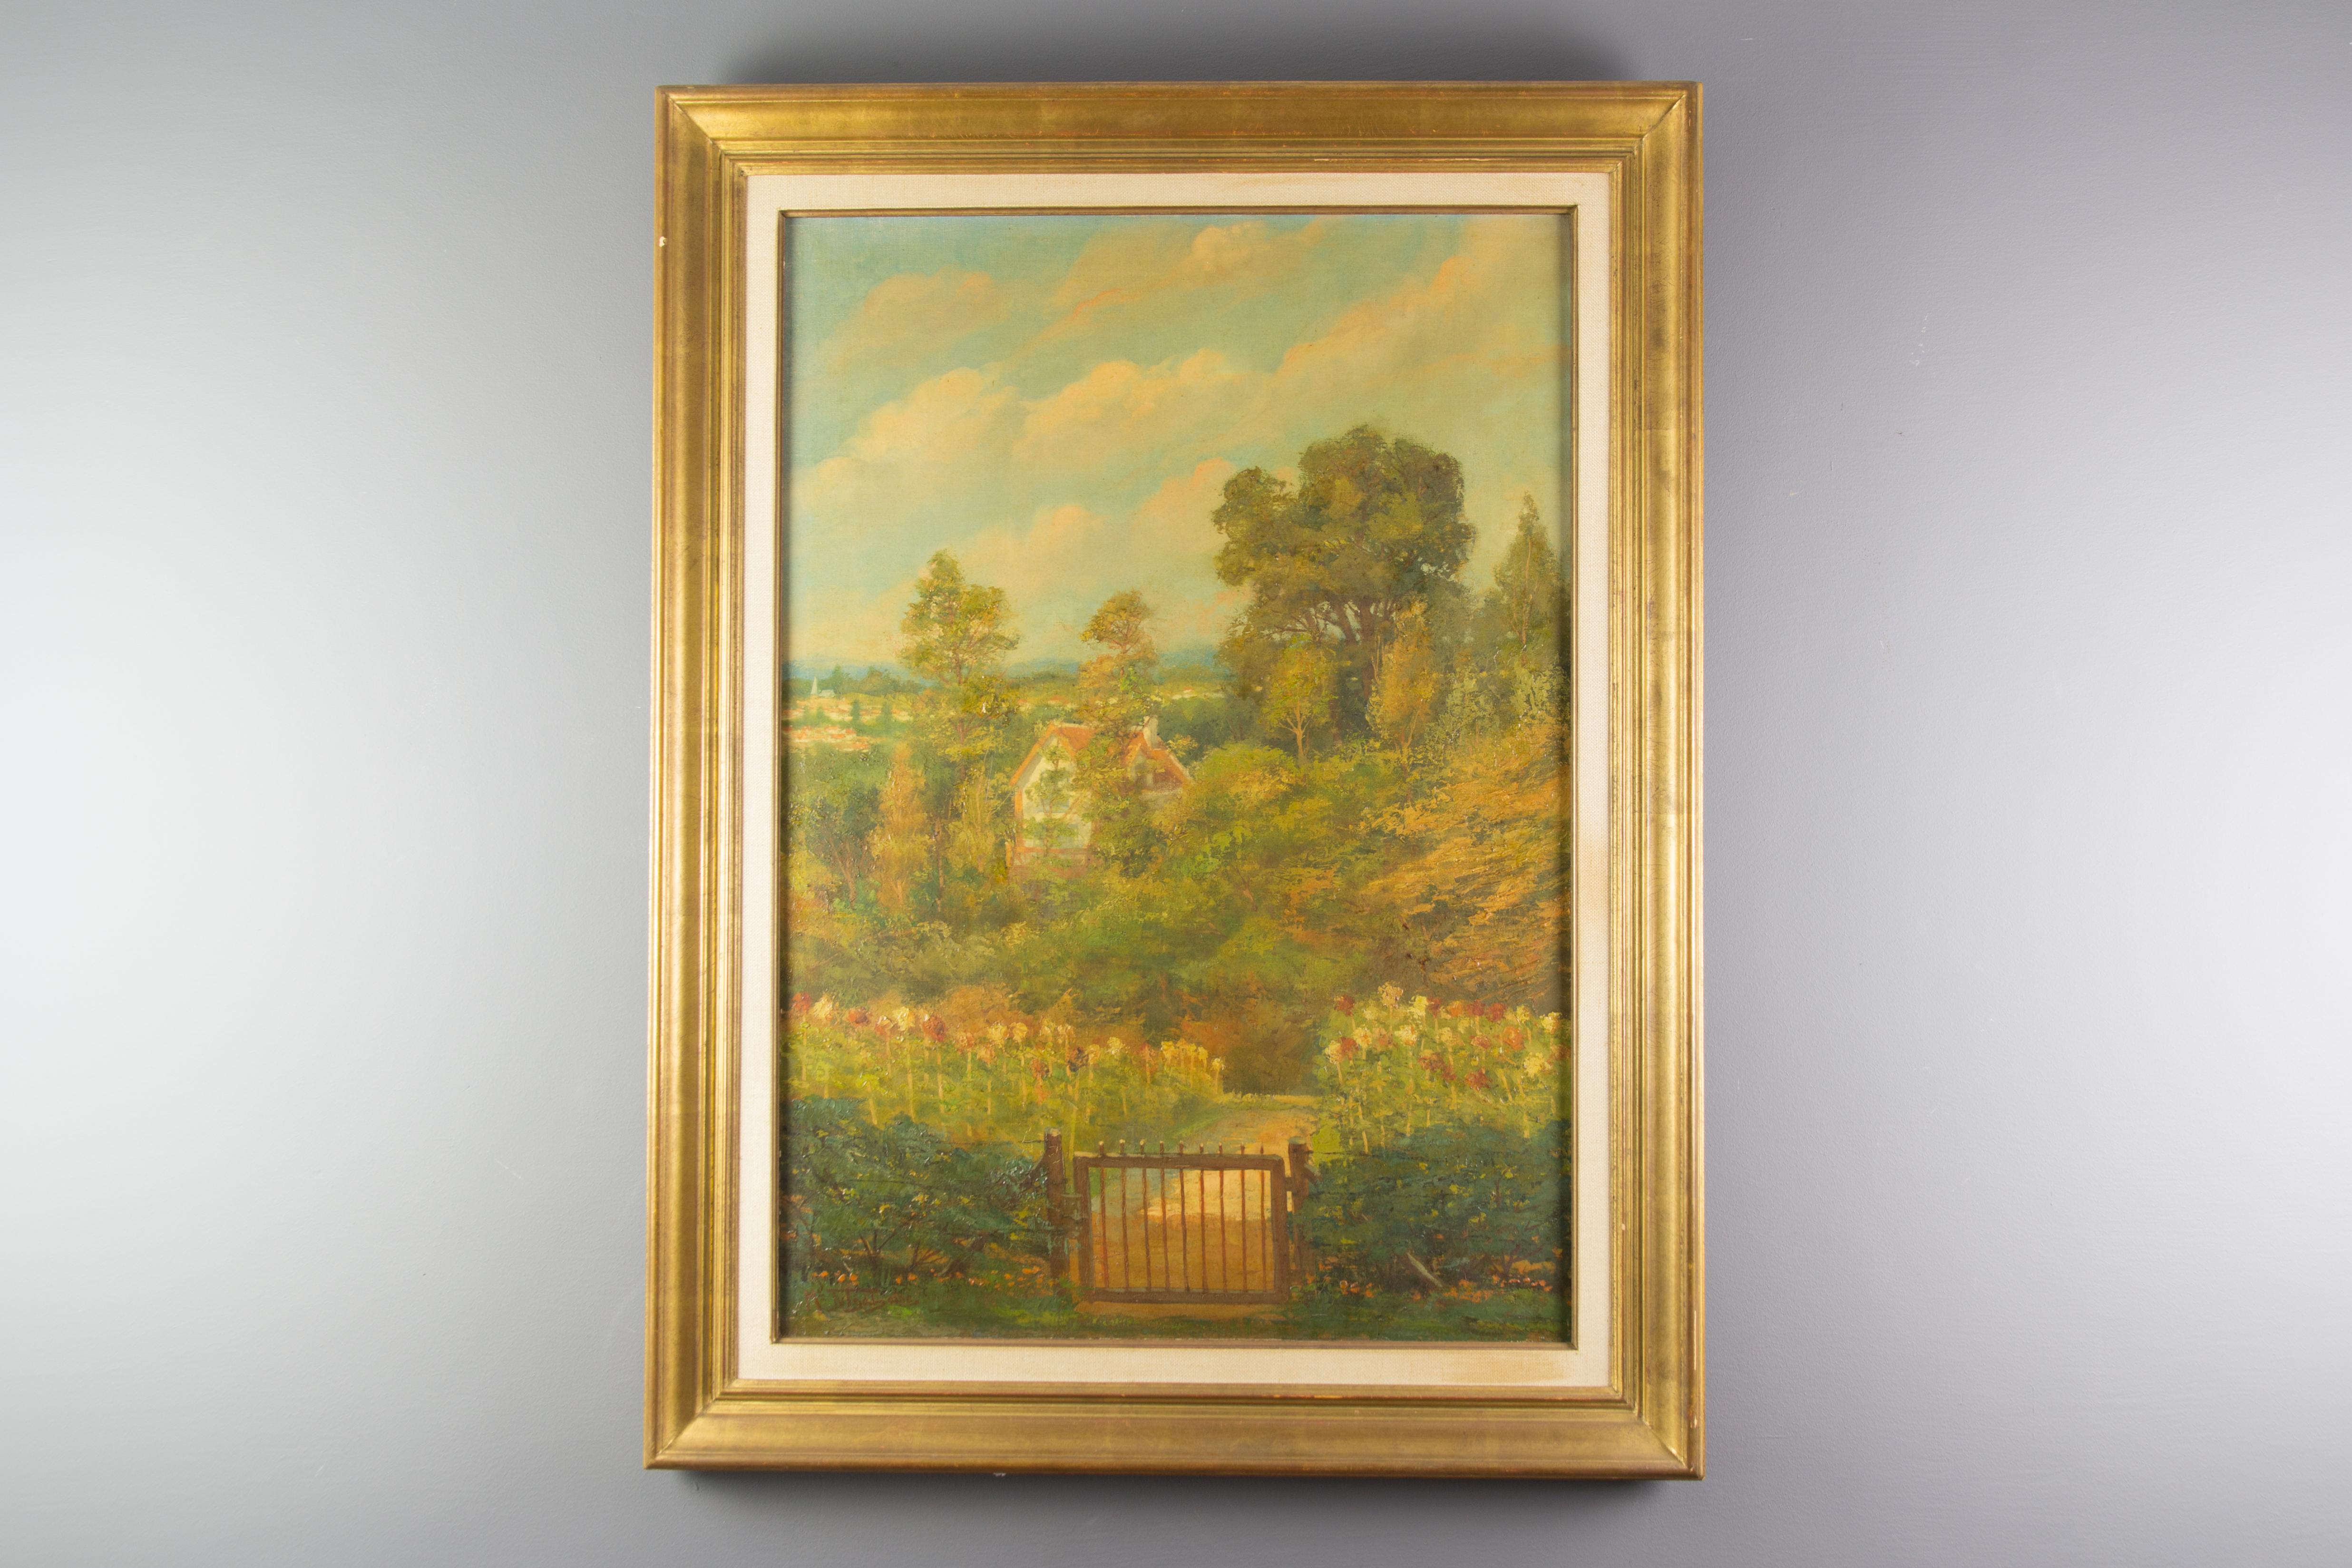 A painting of a garden landscape, oil on canvas signed left below 'M. Tytgat Aine'.
Médard Tytgat (8 February 1871, Bruges – 11 January 1948, Brussels), a Belgian painter, lithographer, book illustrator, and poster artist.
Dimensions canvas: 65 cm x